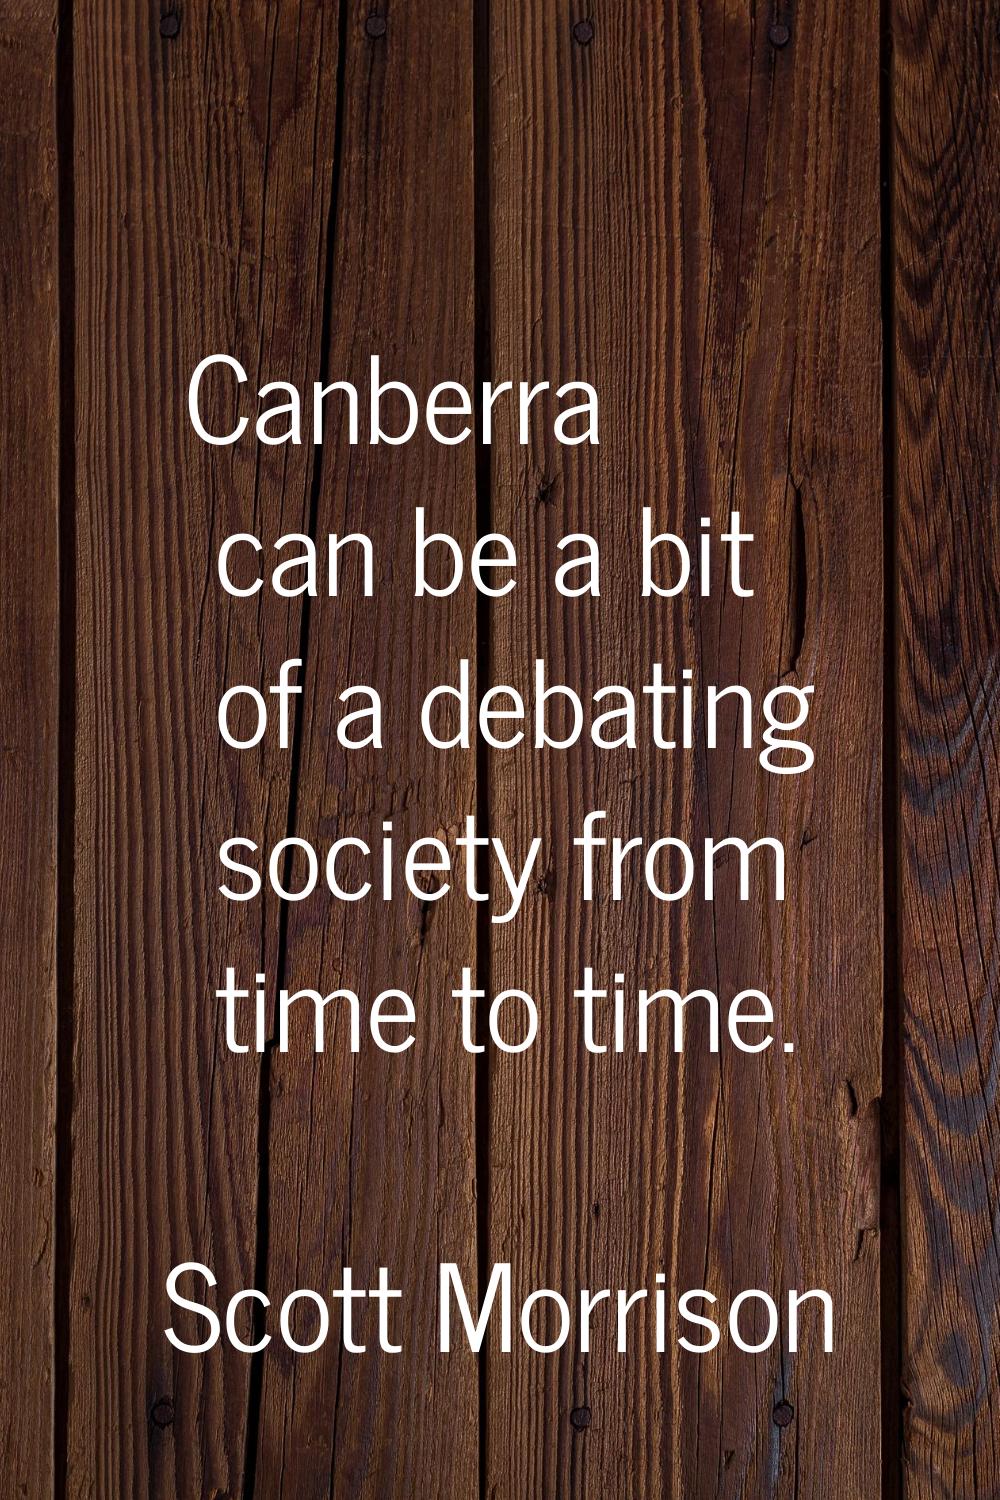 Canberra can be a bit of a debating society from time to time.